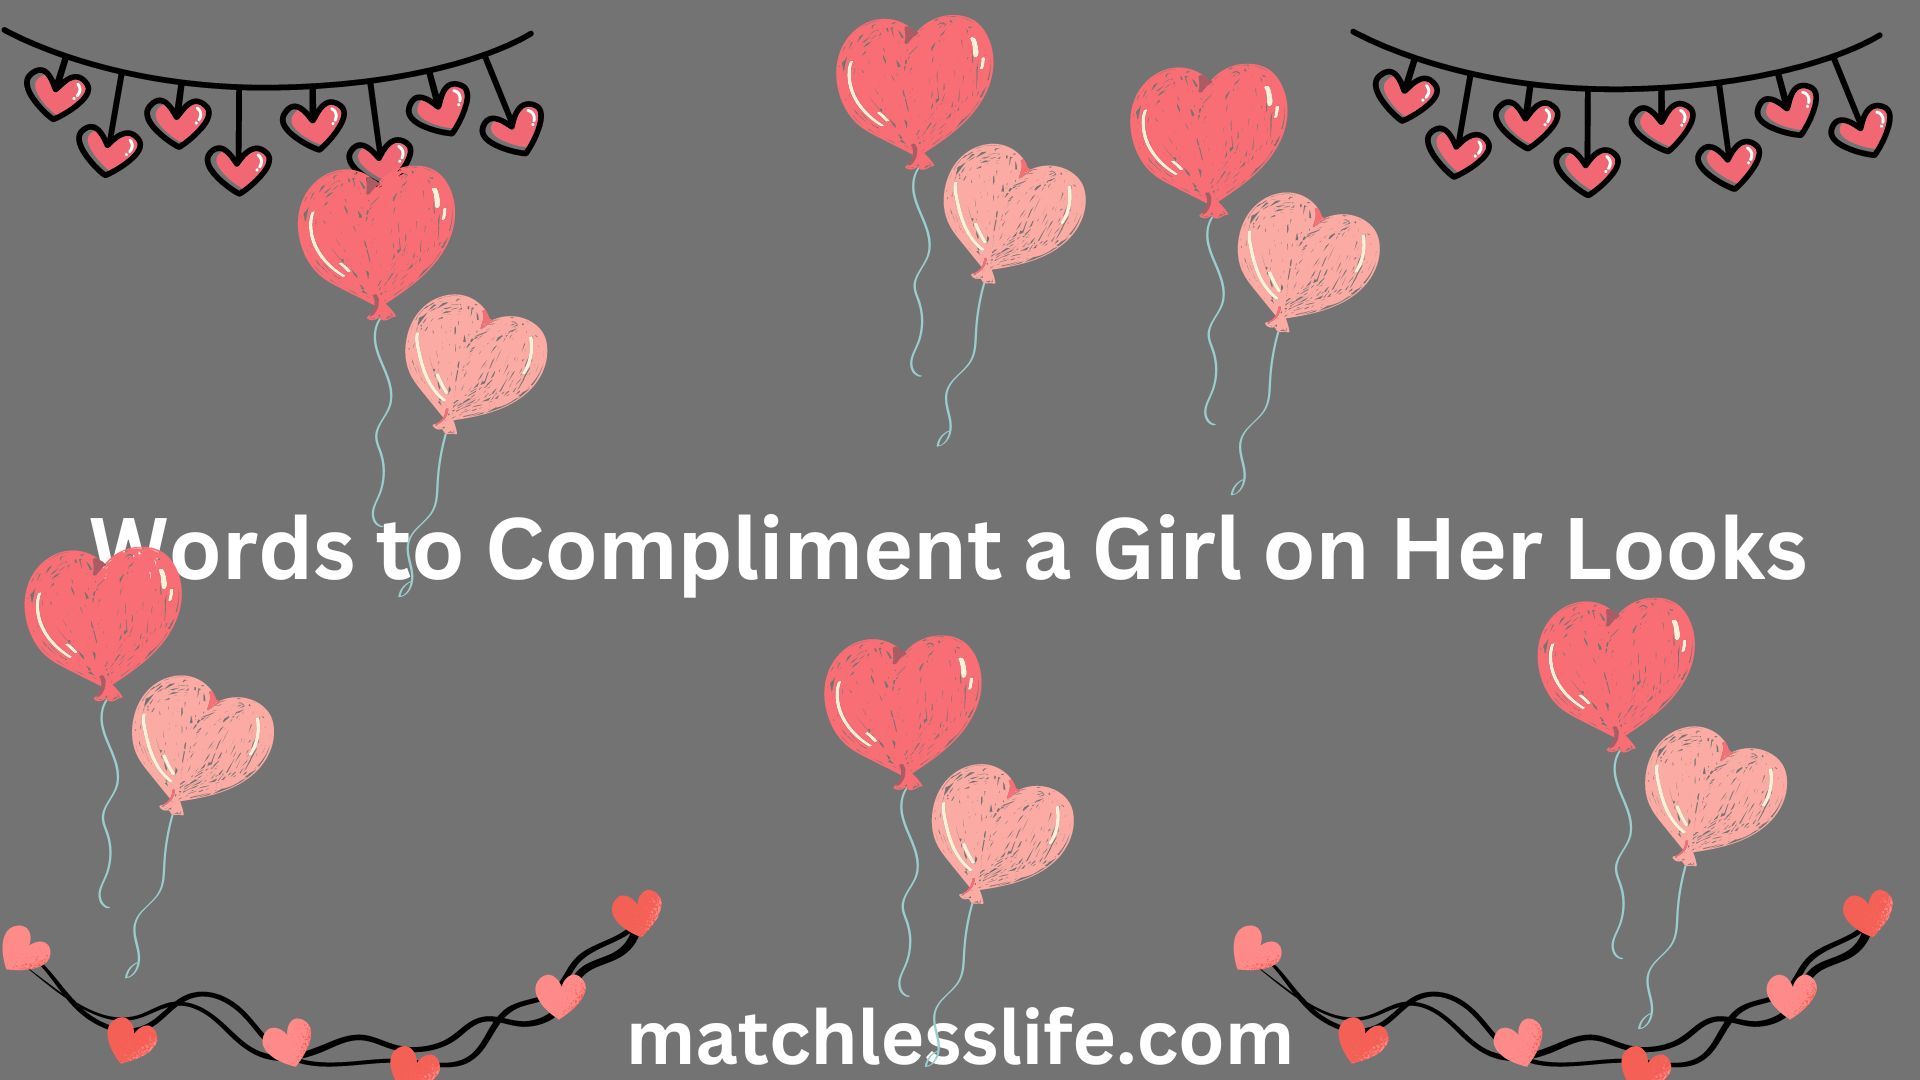 Words to Compliment a Girl on Her Looks